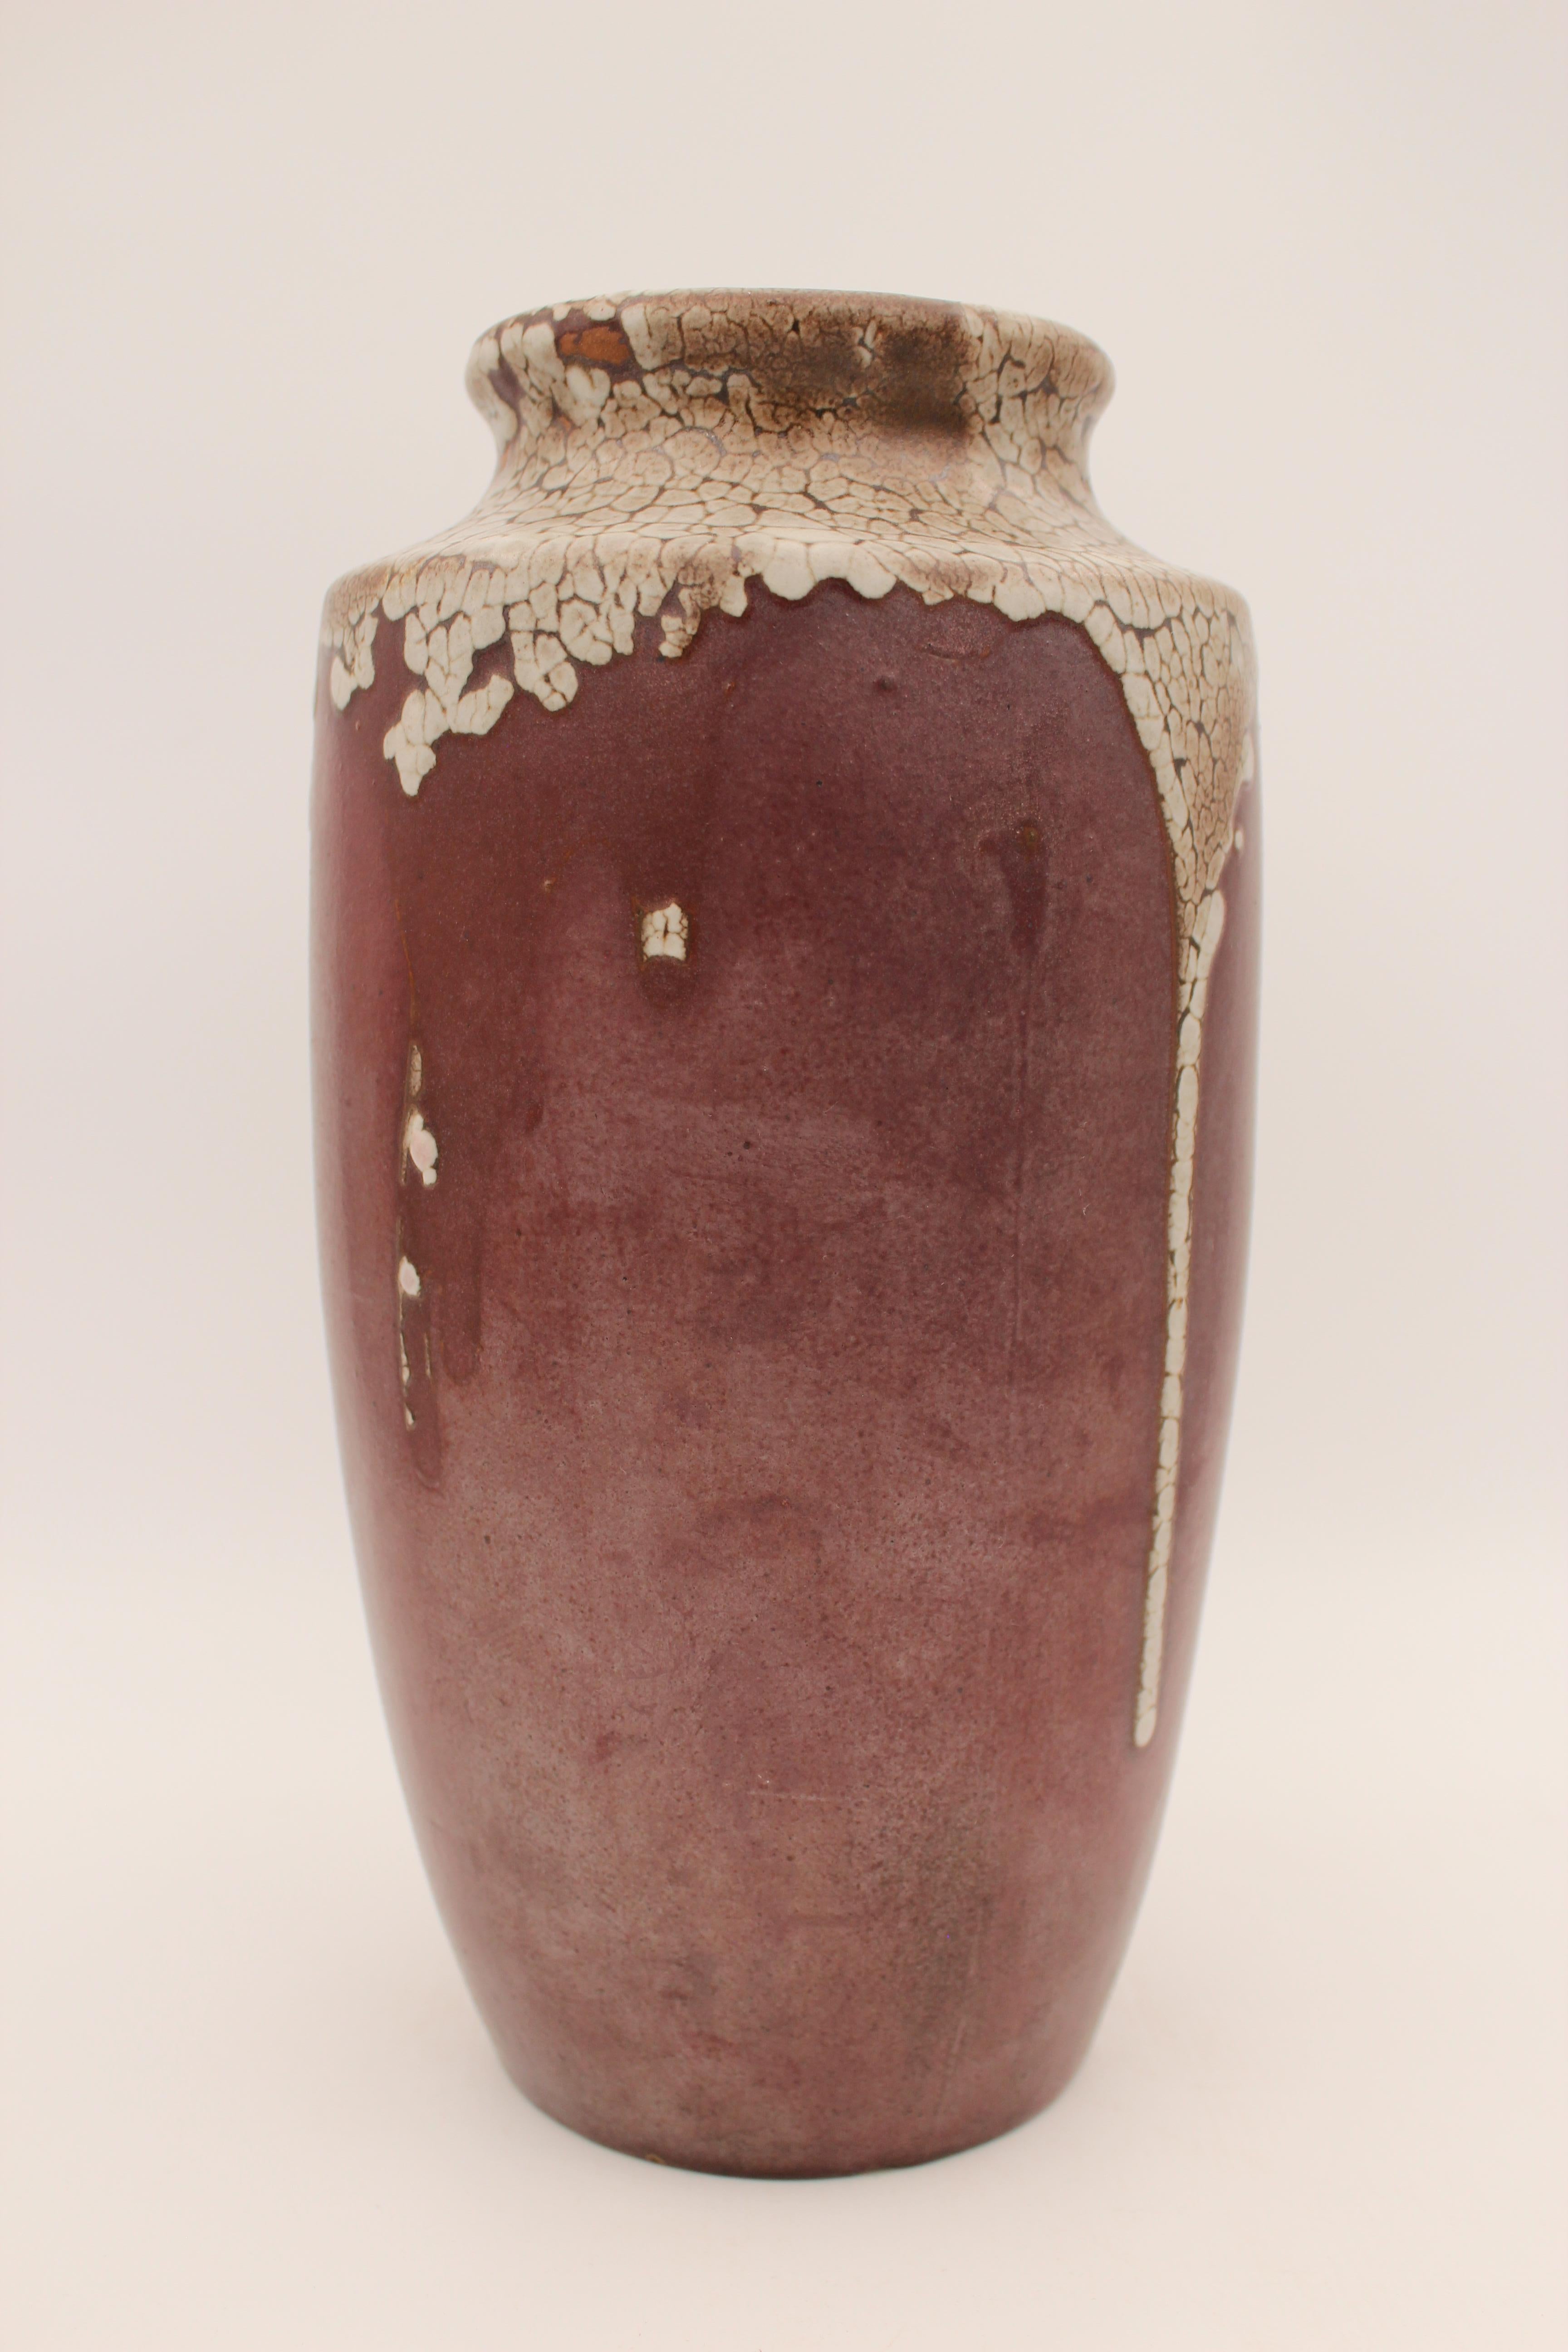 A beautiful stoneware vase of Japoniste inspiration, passed brown with a flowing cracked white drips, by the French art ceramist Leon Pointu (1879-1942), signed with incised signature ‘Pointu’.